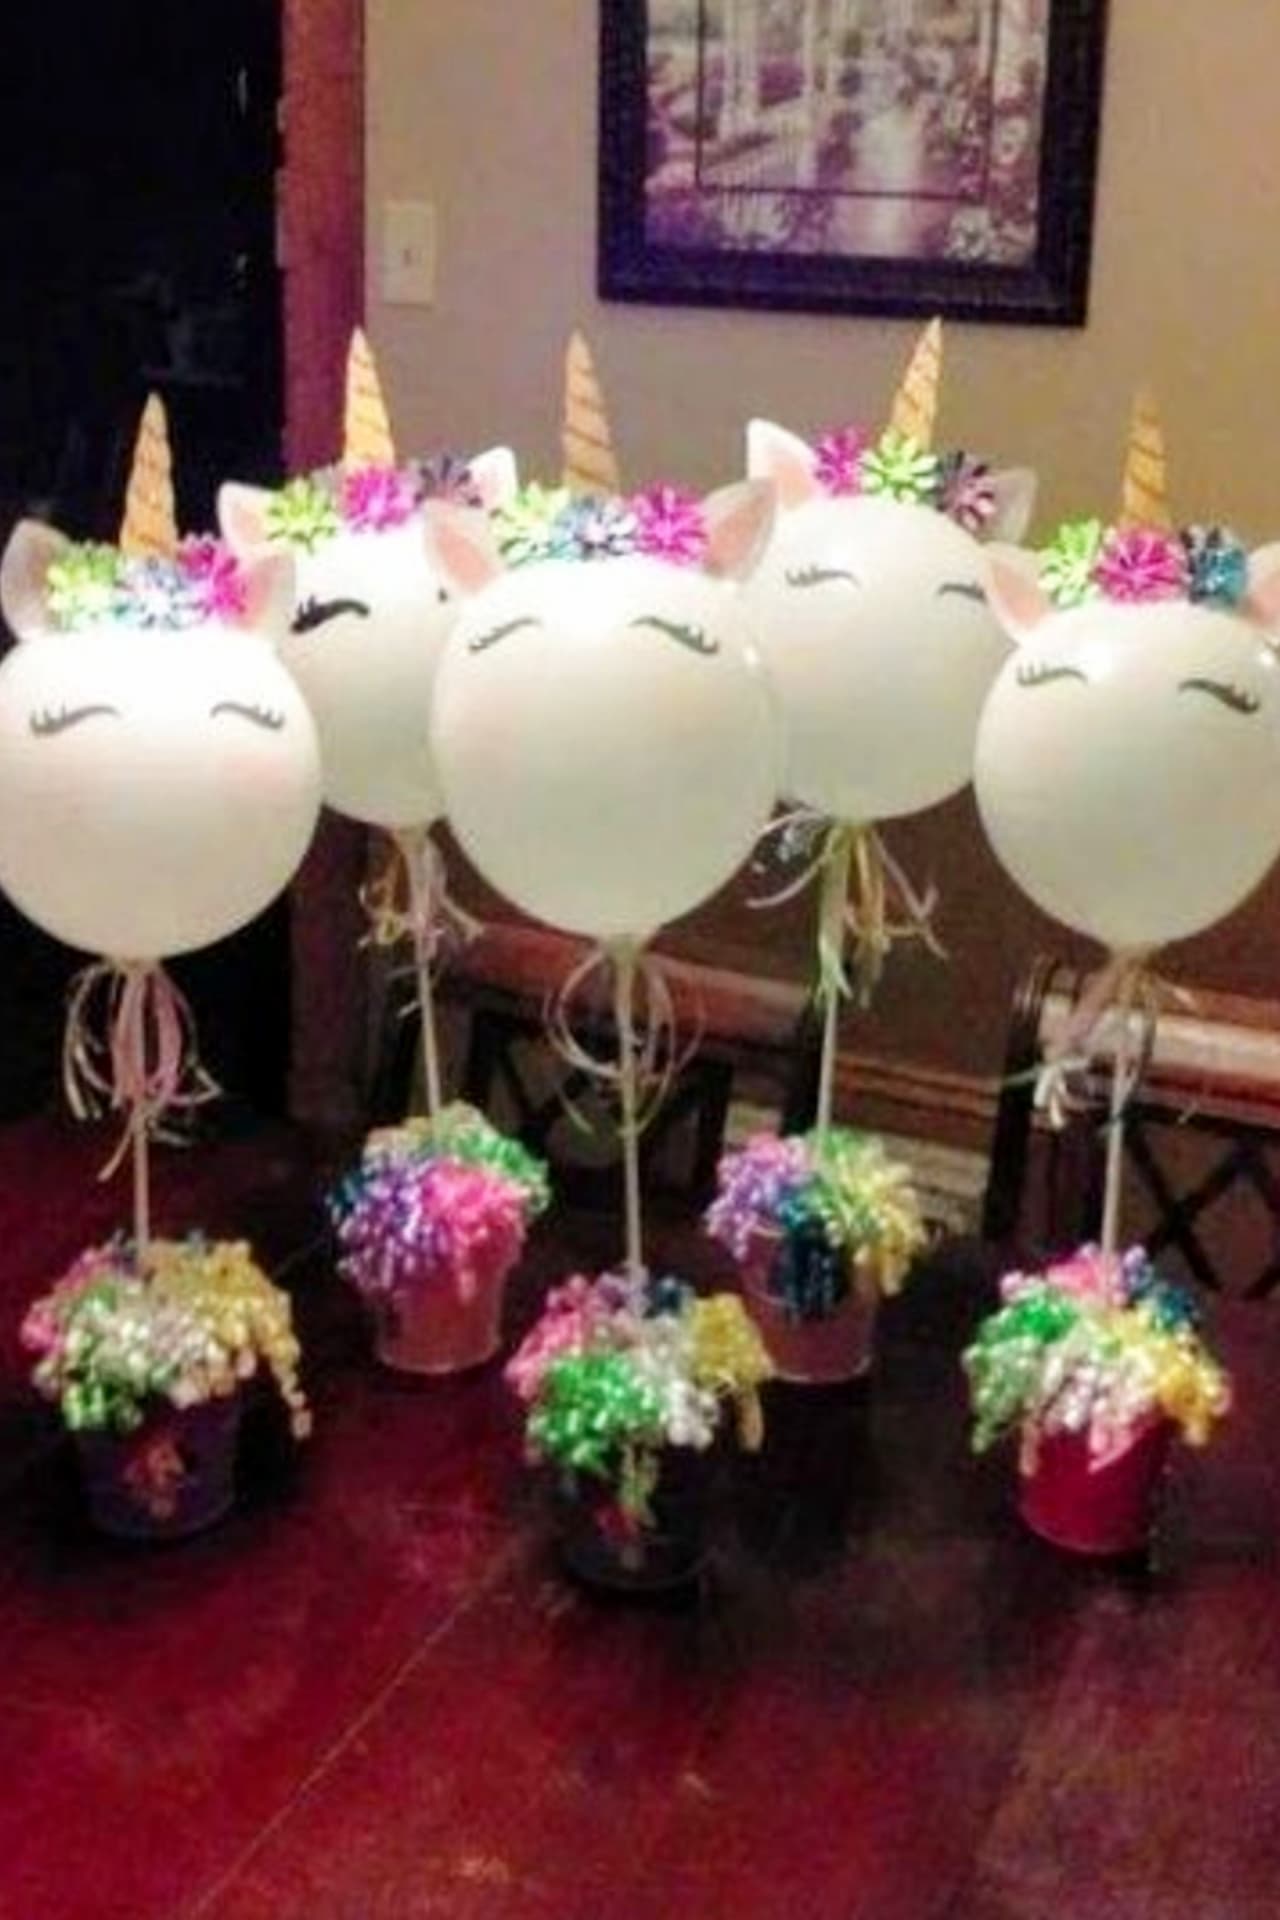 Unicorn birthday party ideas and unicorn crafts for kids - unicorn party centerpieces with balloons - would also be cute DIY unicorn birthday goody bags